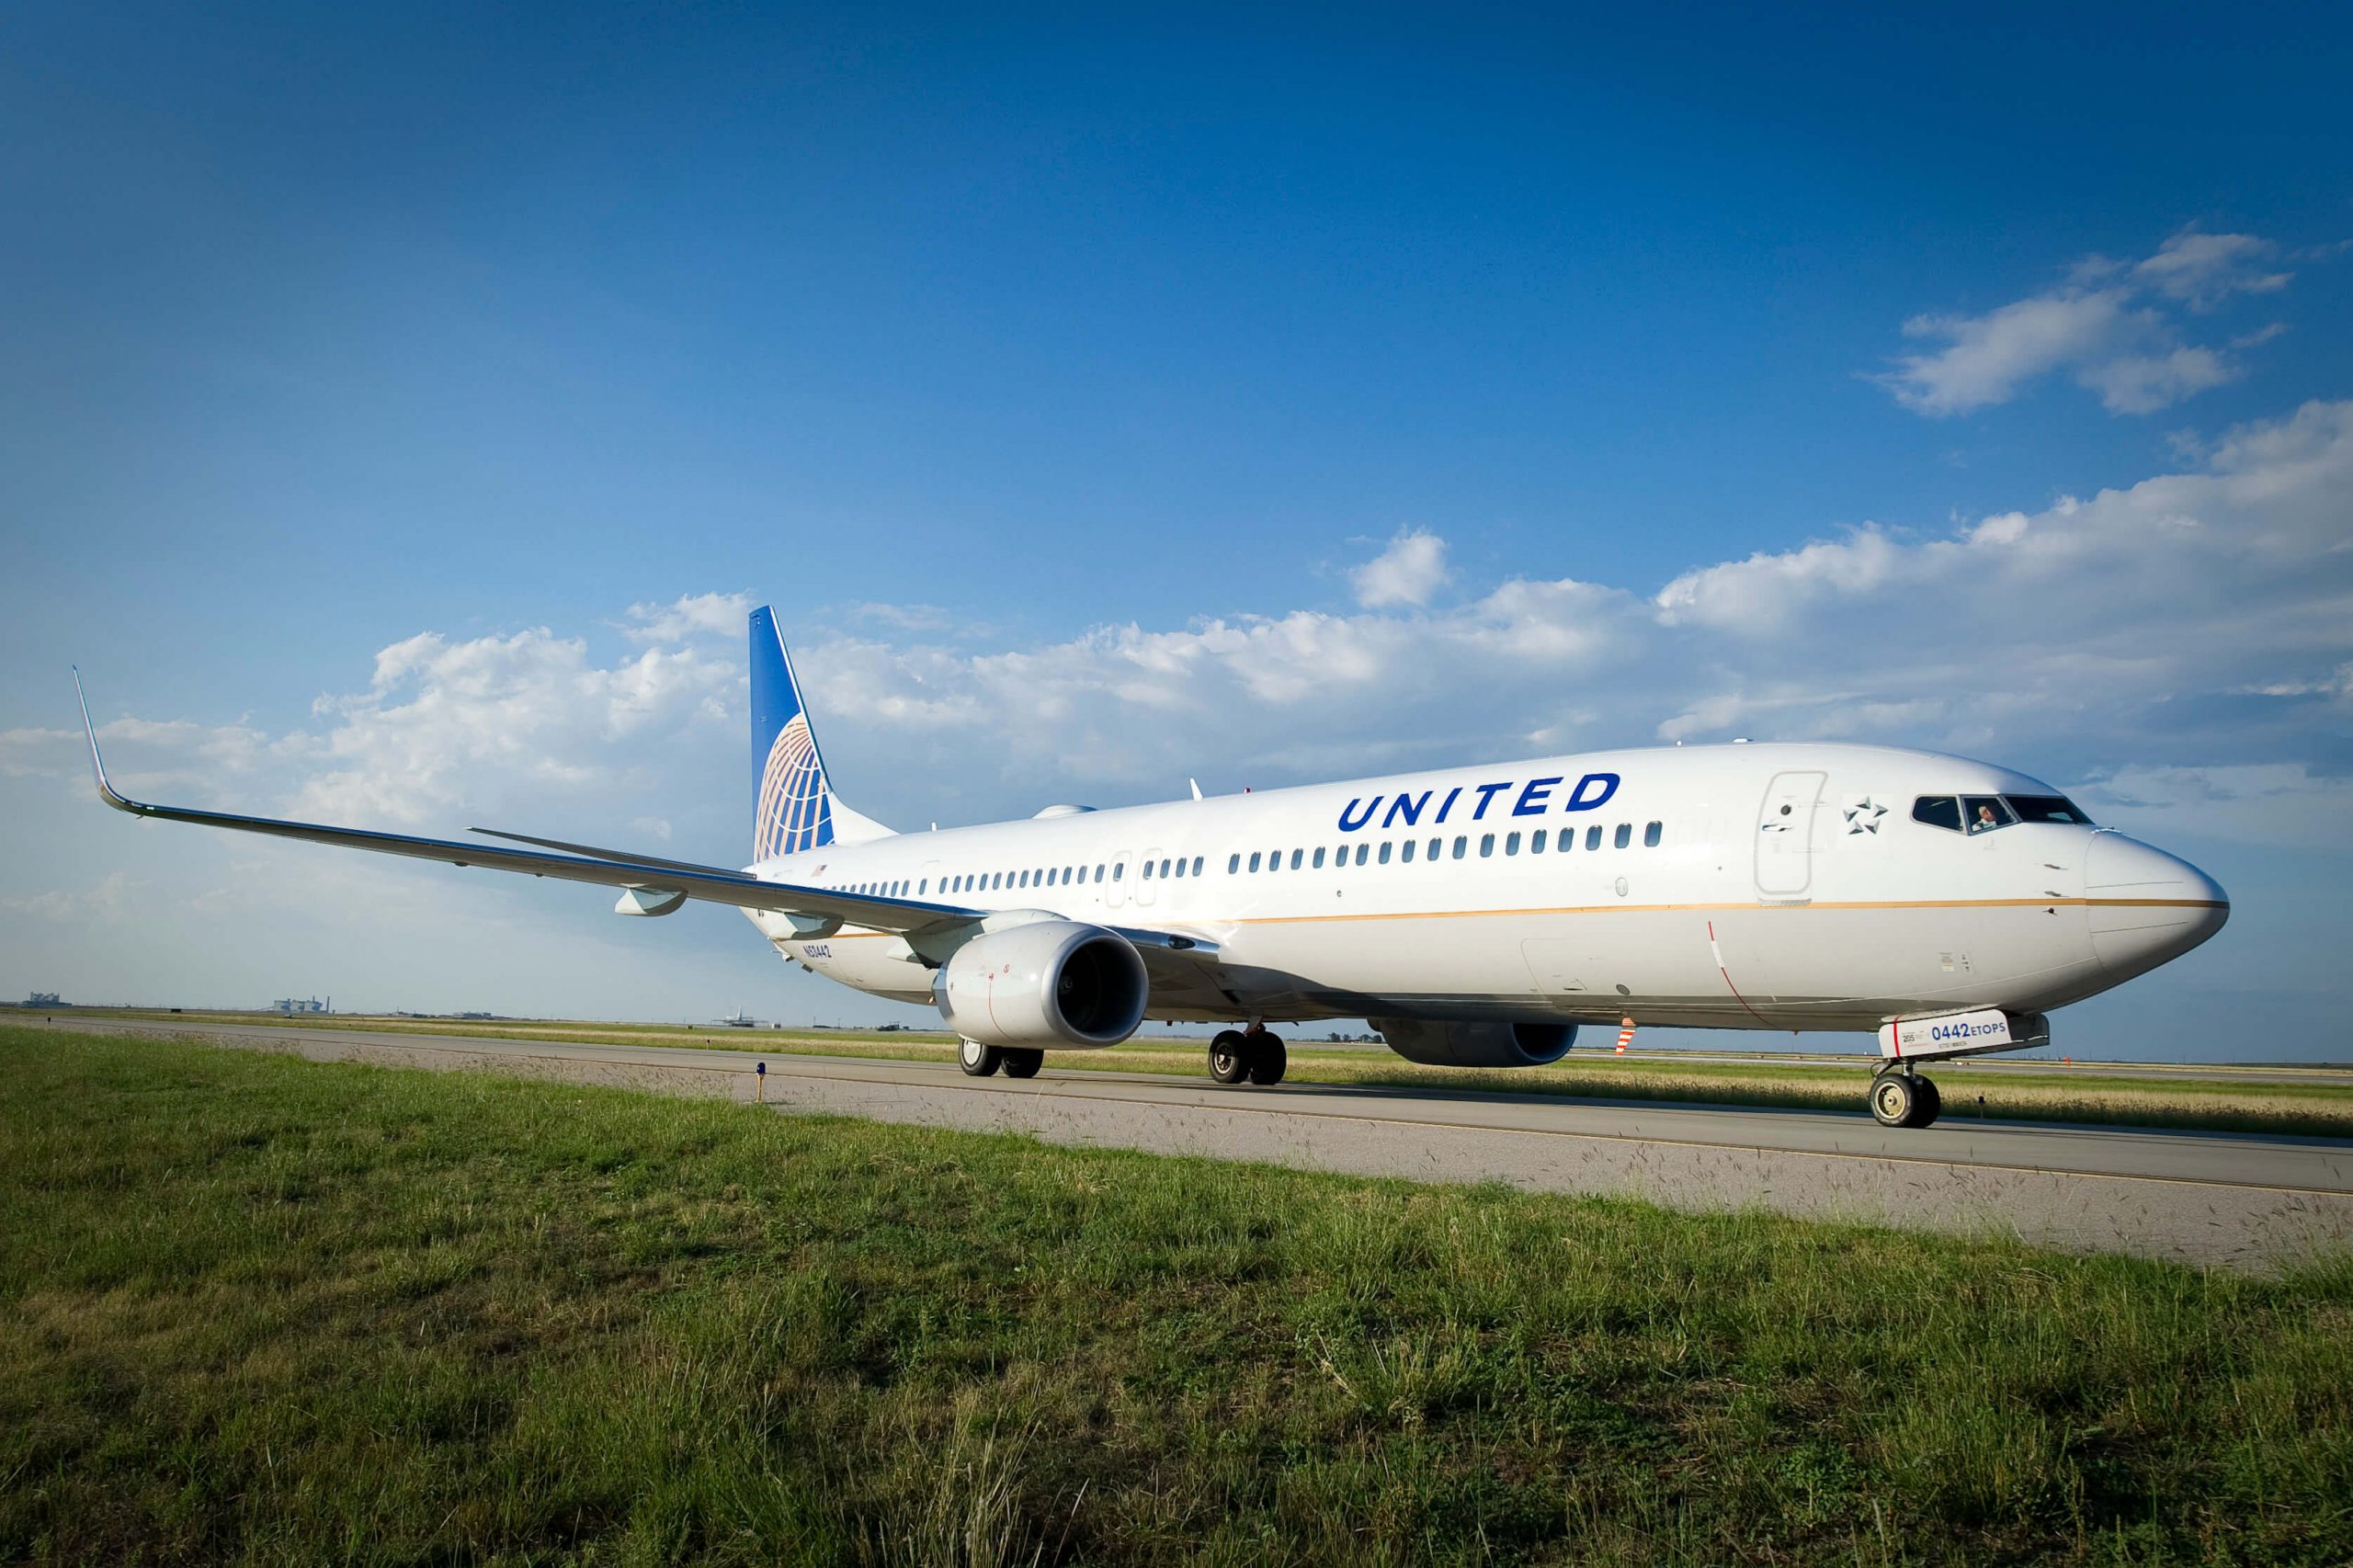 United Airlines set to introduce a new CEO in May 2020